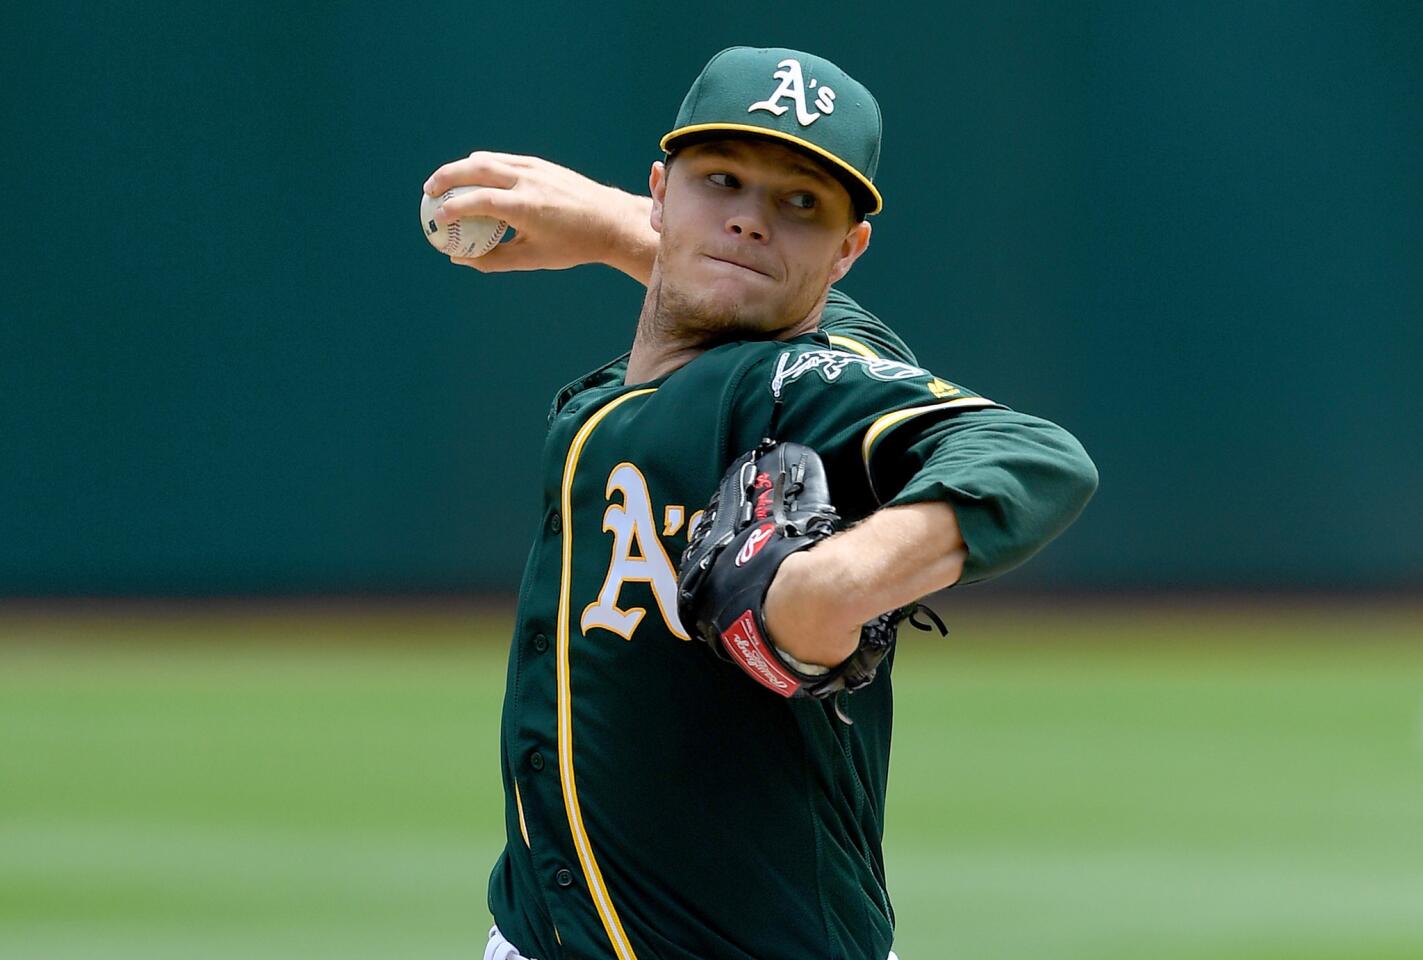 Prospect-seeking franchise has starter Sonny Gray as trade chip with top prospect Eloy Jimenez a likely target.